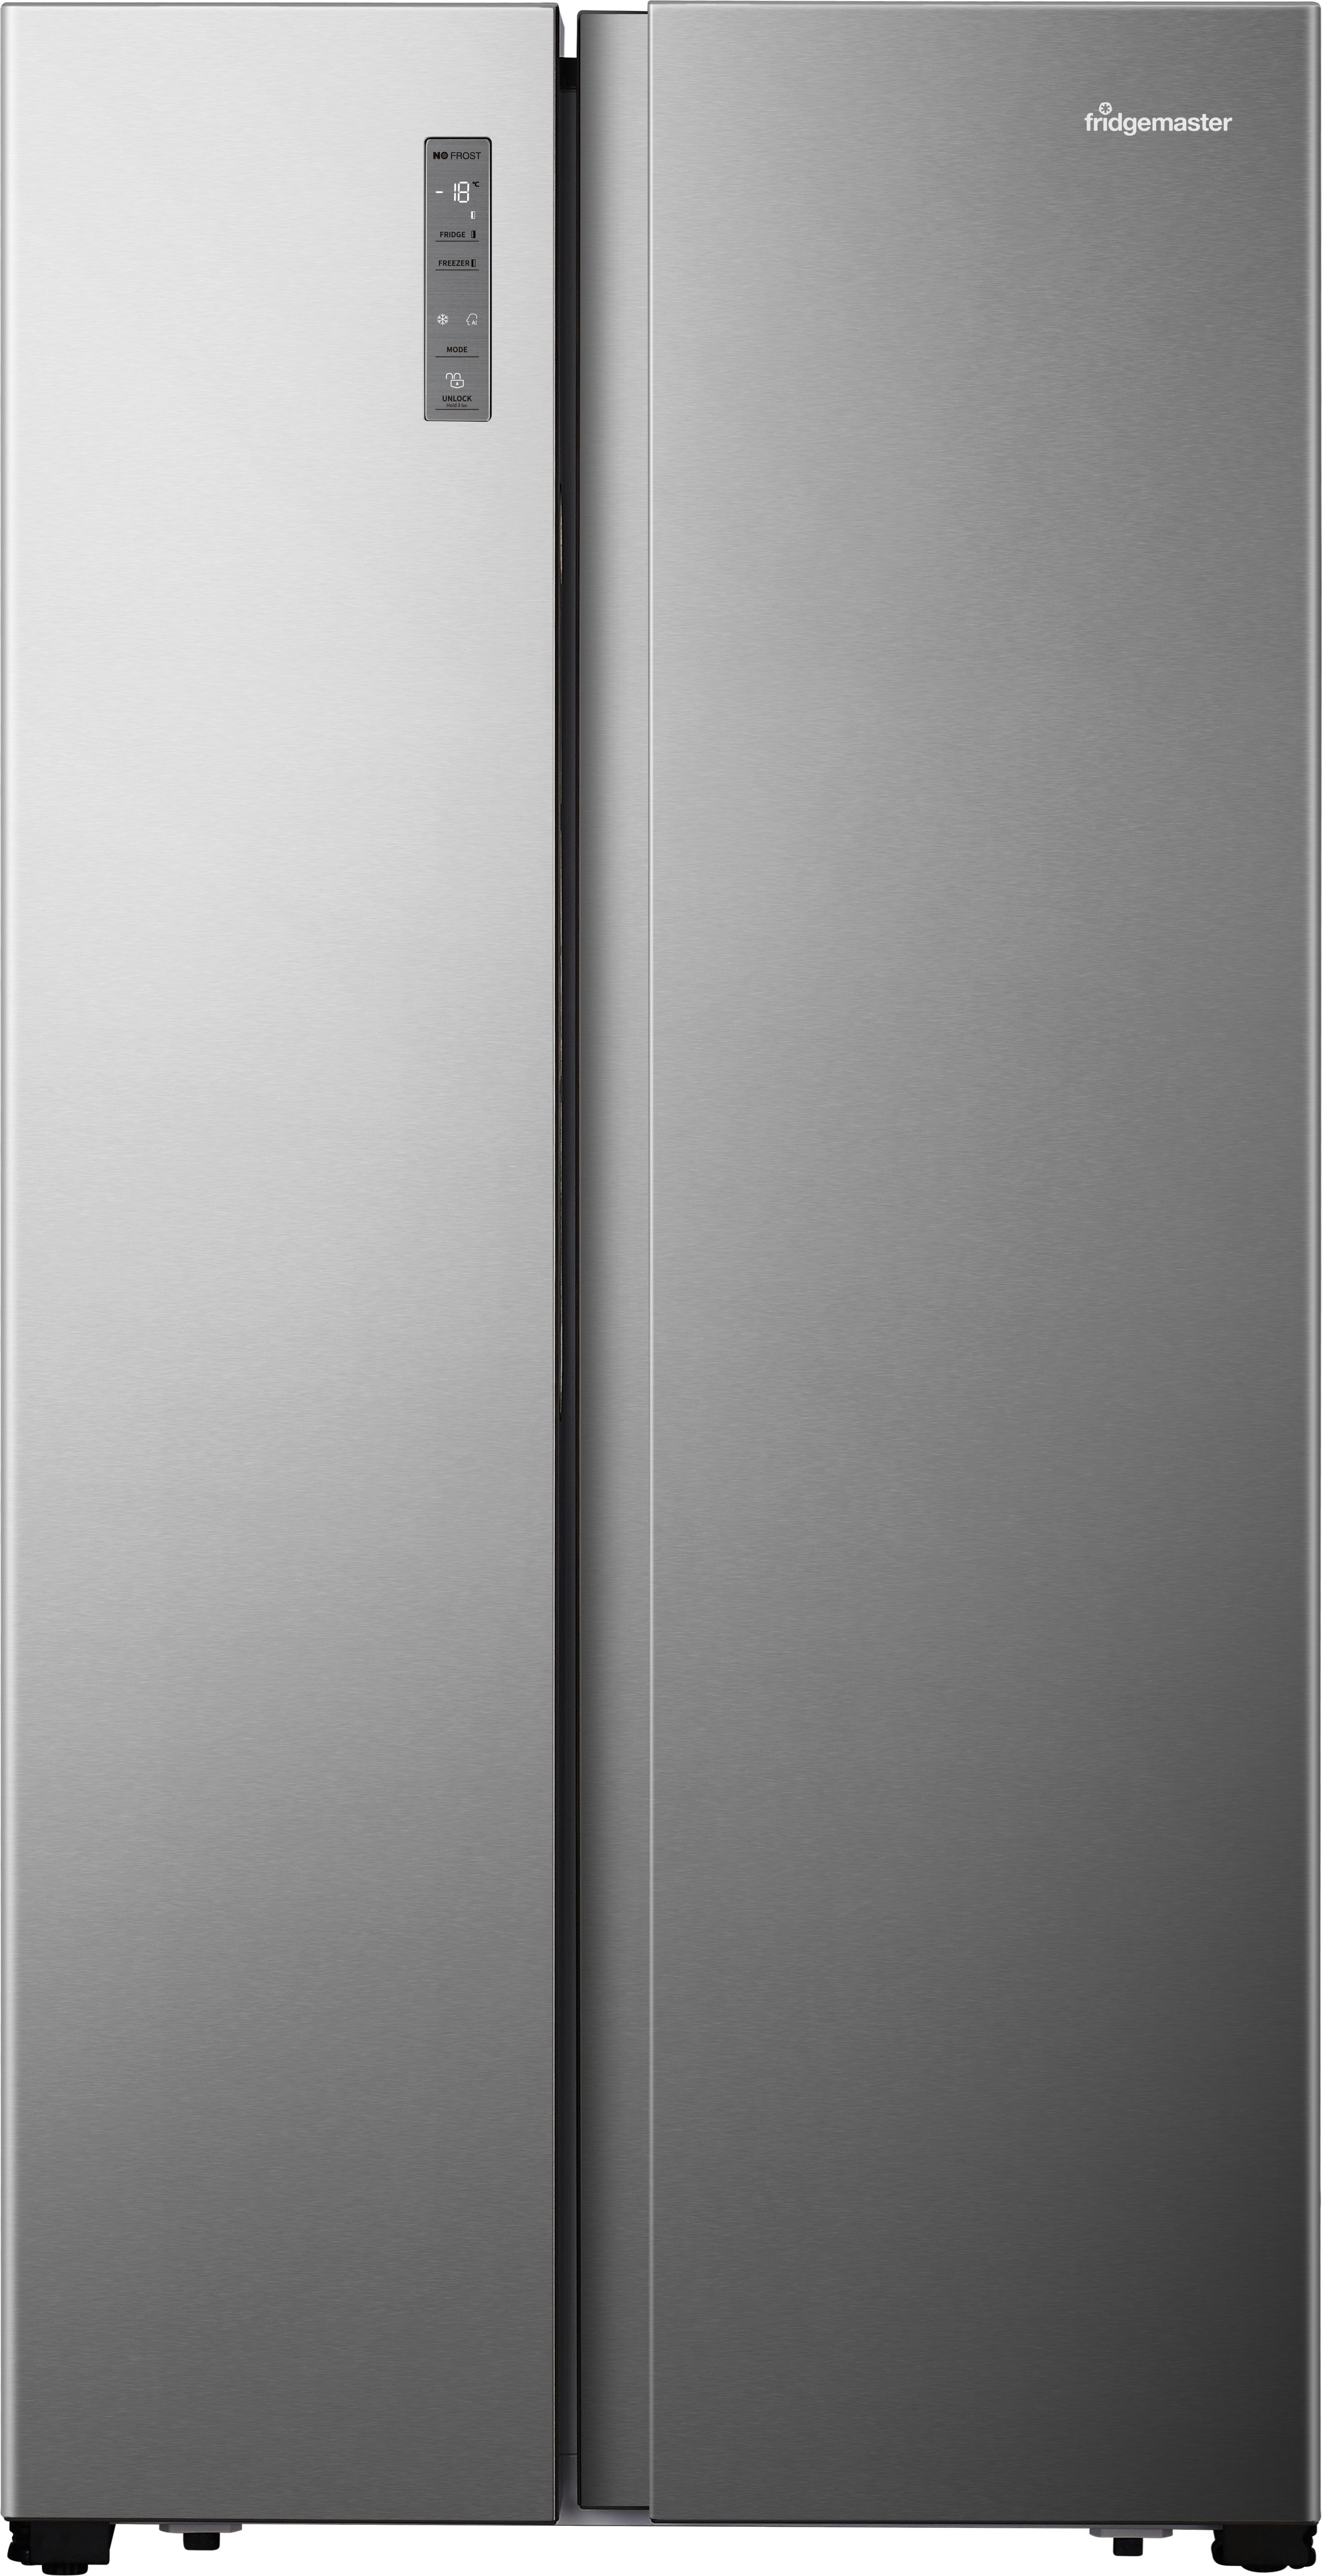 Fridgemaster MS91520ES Total No Frost American Fridge Freezer - Silver - E Rated Silver